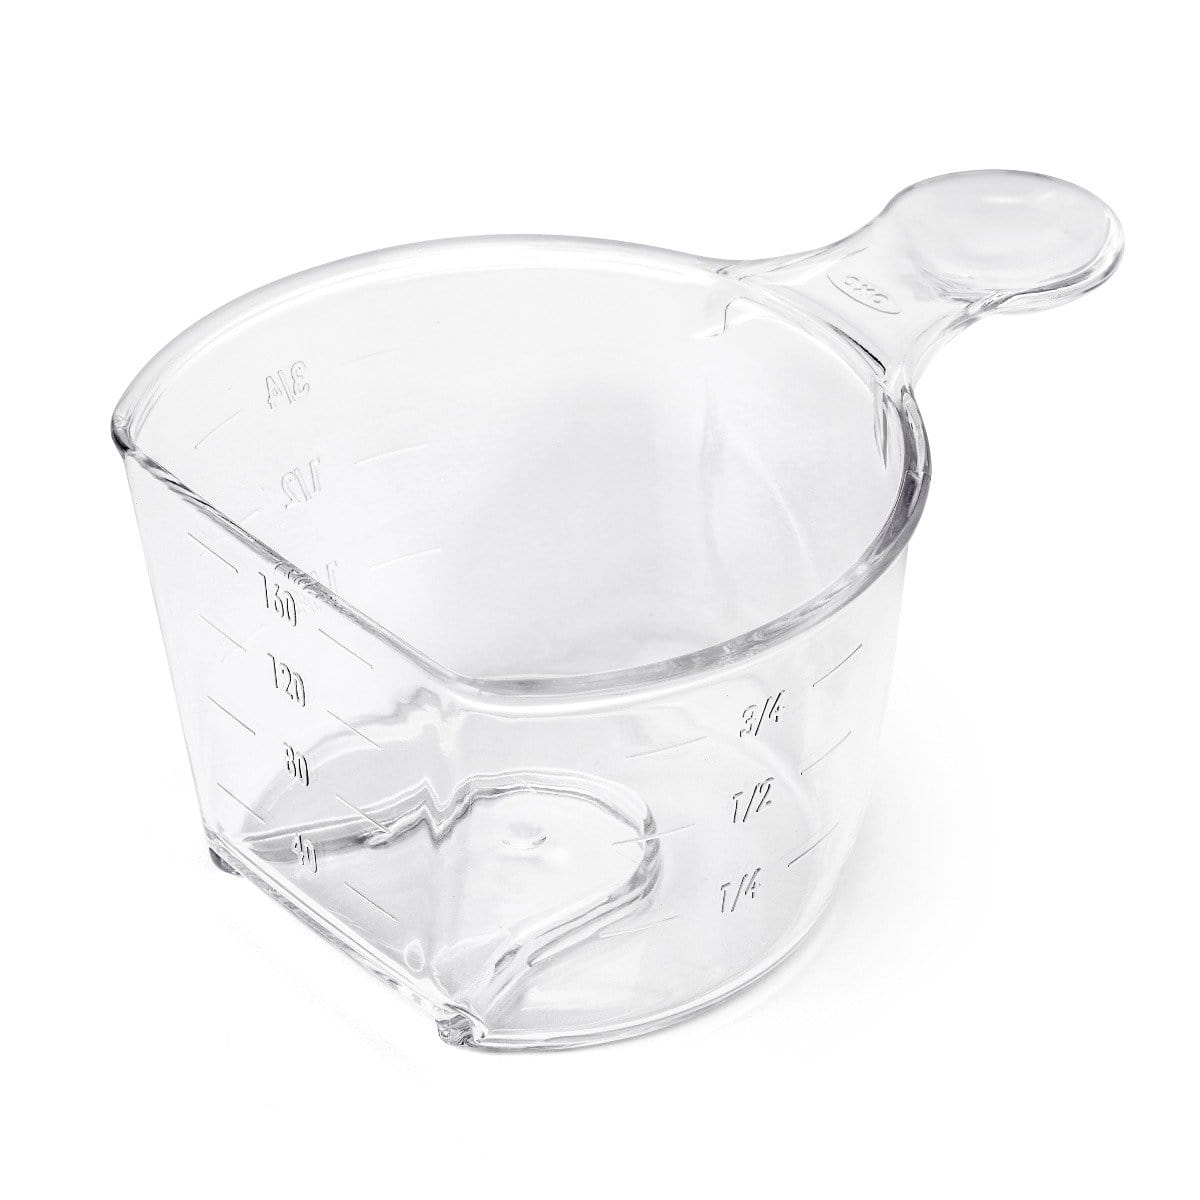 https://cdn.shopify.com/s/files/1/0473/5398/7229/products/oxo-oxo-pop-rice-measuring-cup-719812685663-21049468059808_1600x.jpg?v=1626104289